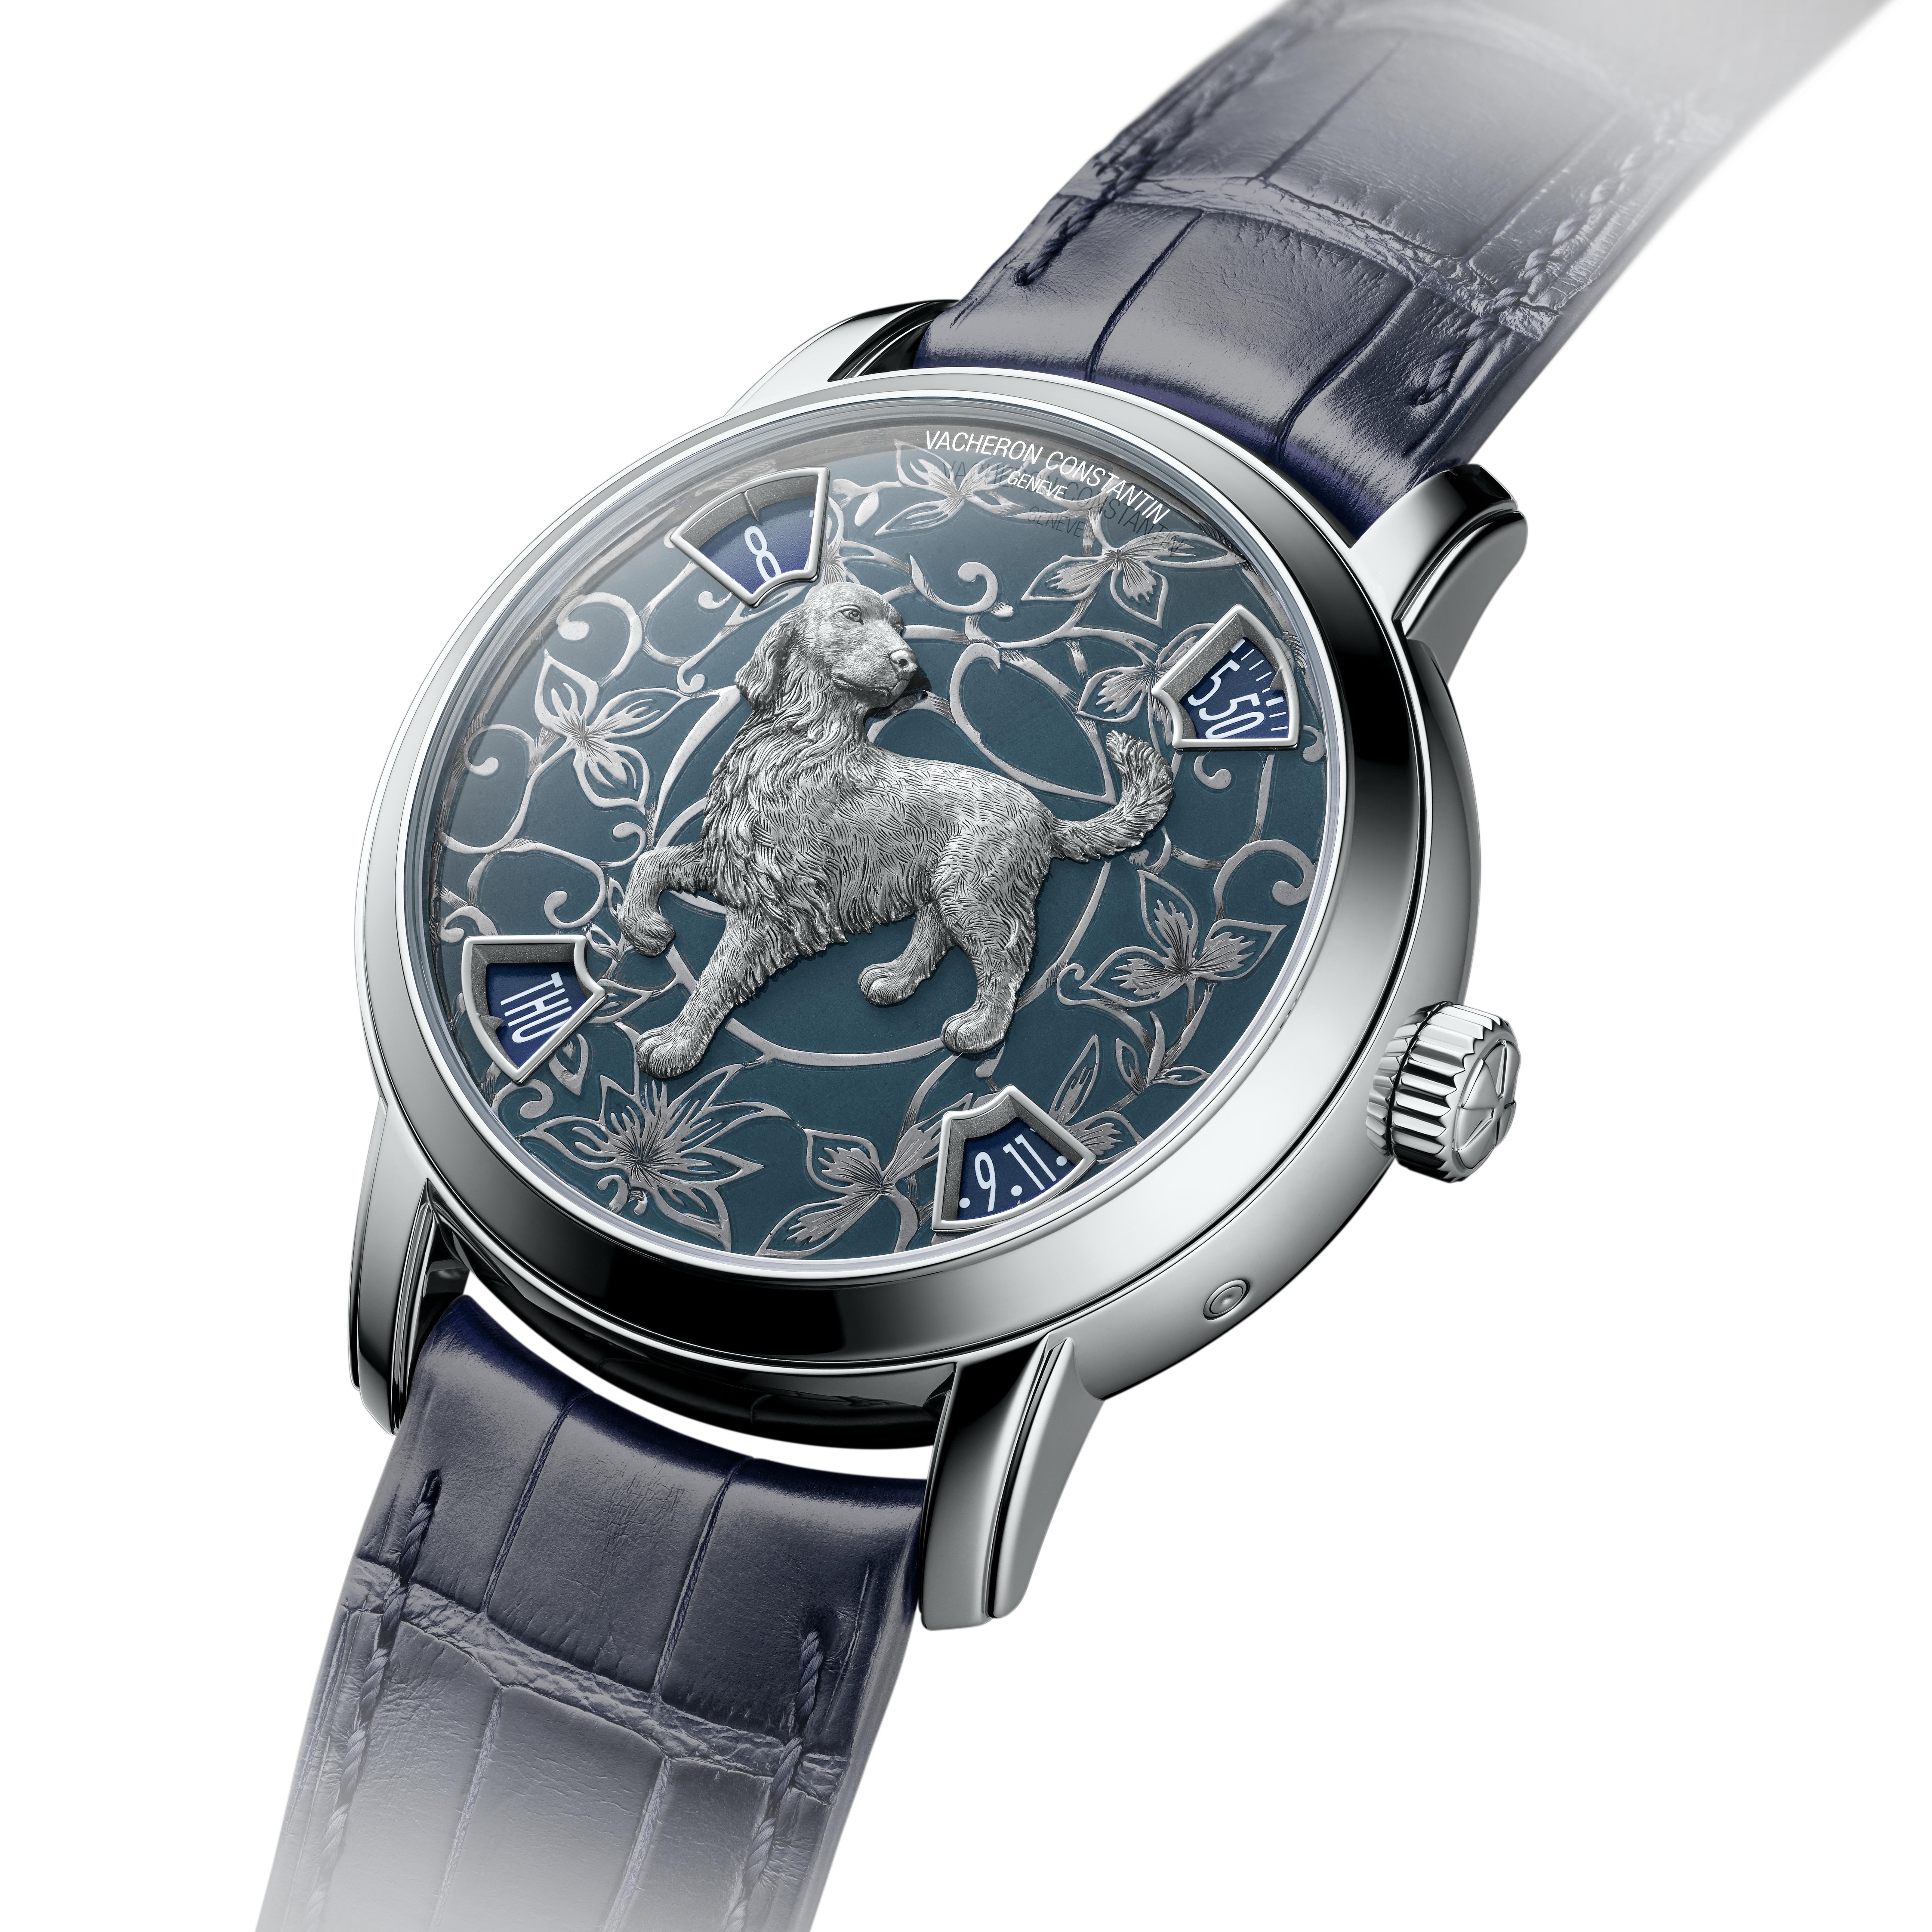 METIERS D’ART
THE LEGEND OF THE CHINESE ZODIAC – year of the dog